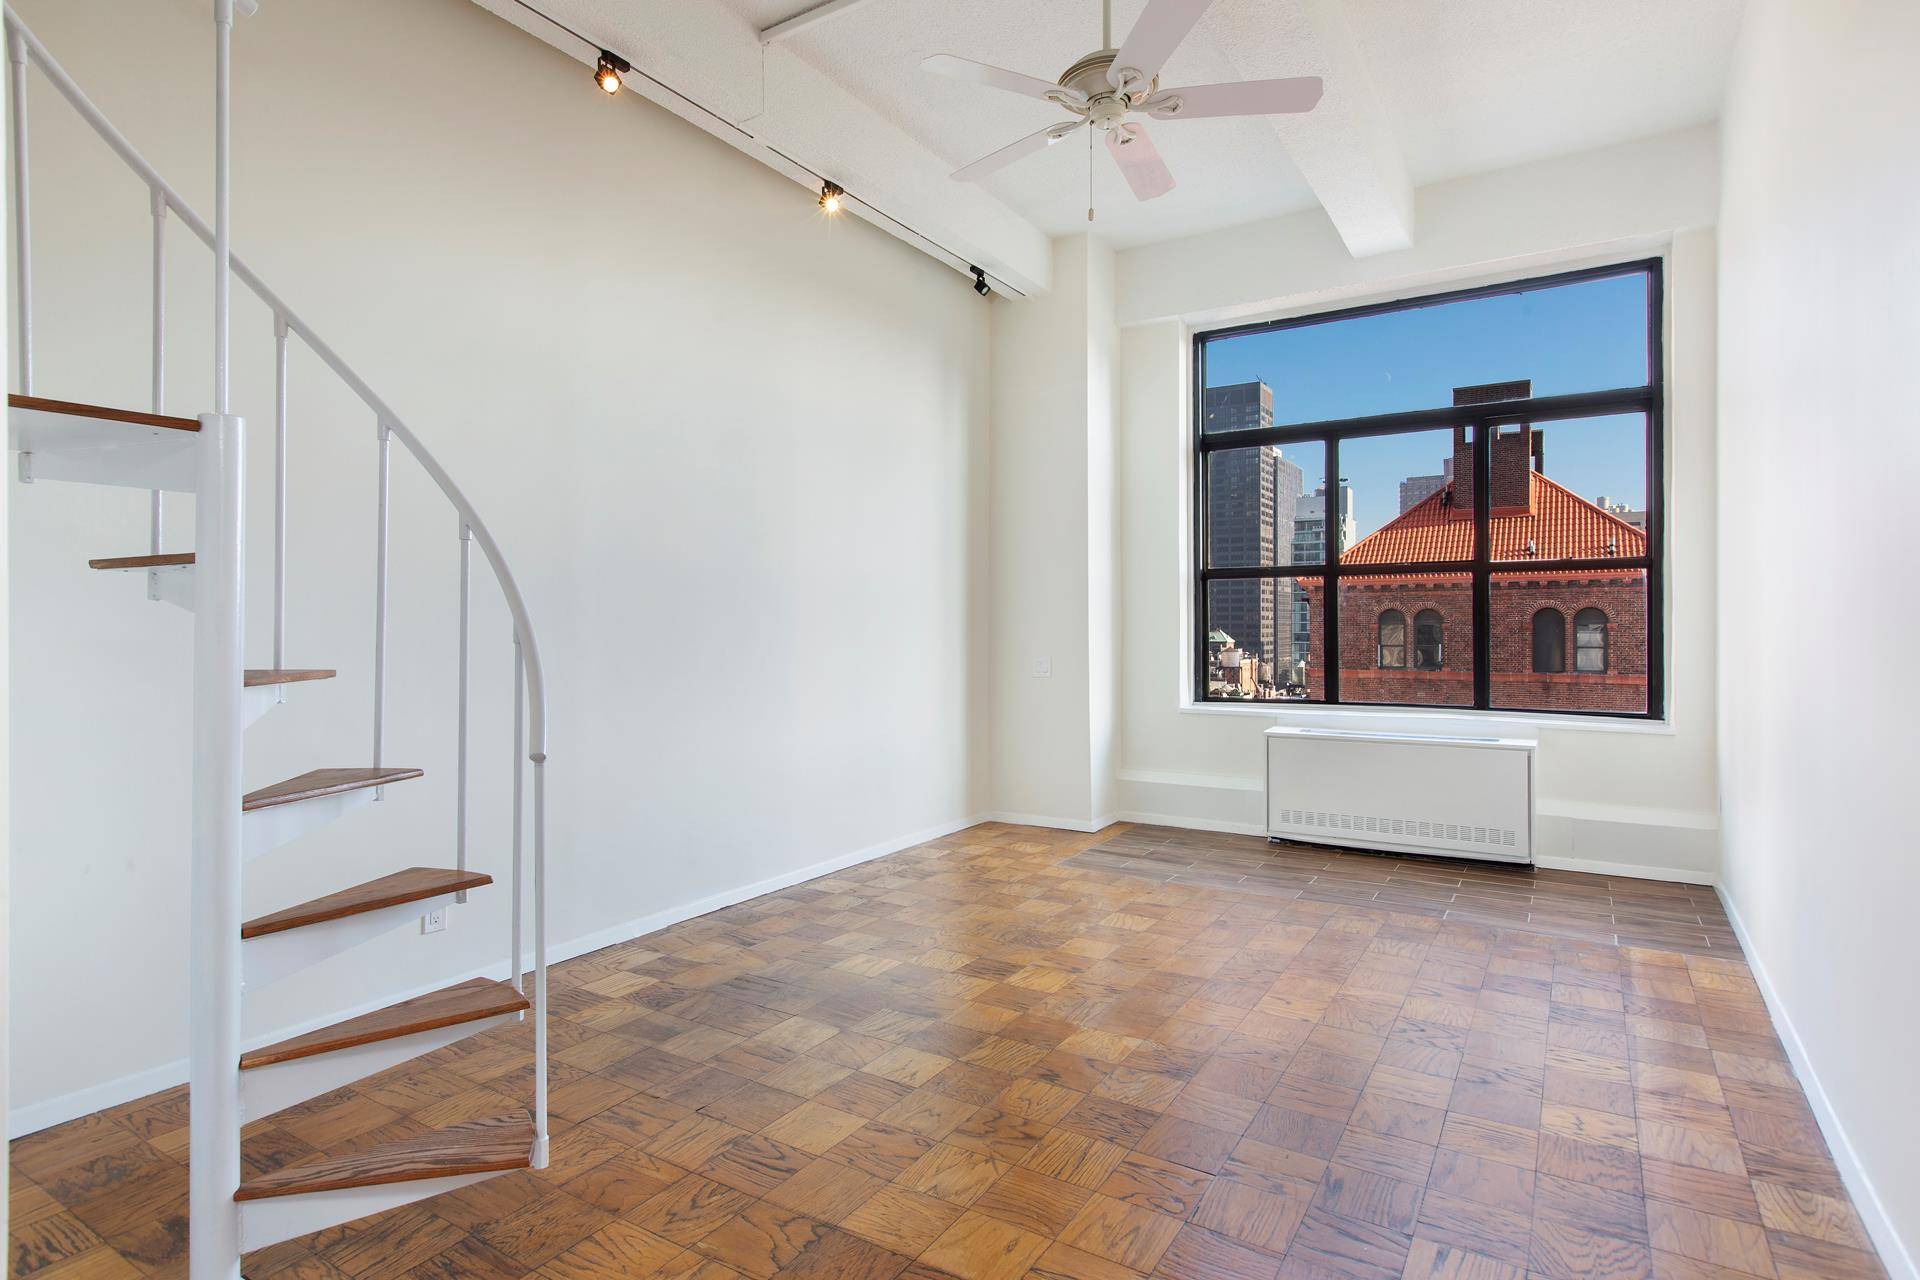 A modern gem at the elegant prewar Murray Hill Plaza, this Top Floor Penthouse studio apartment with a sleeping loft is spacious, airy and beautifully designed.